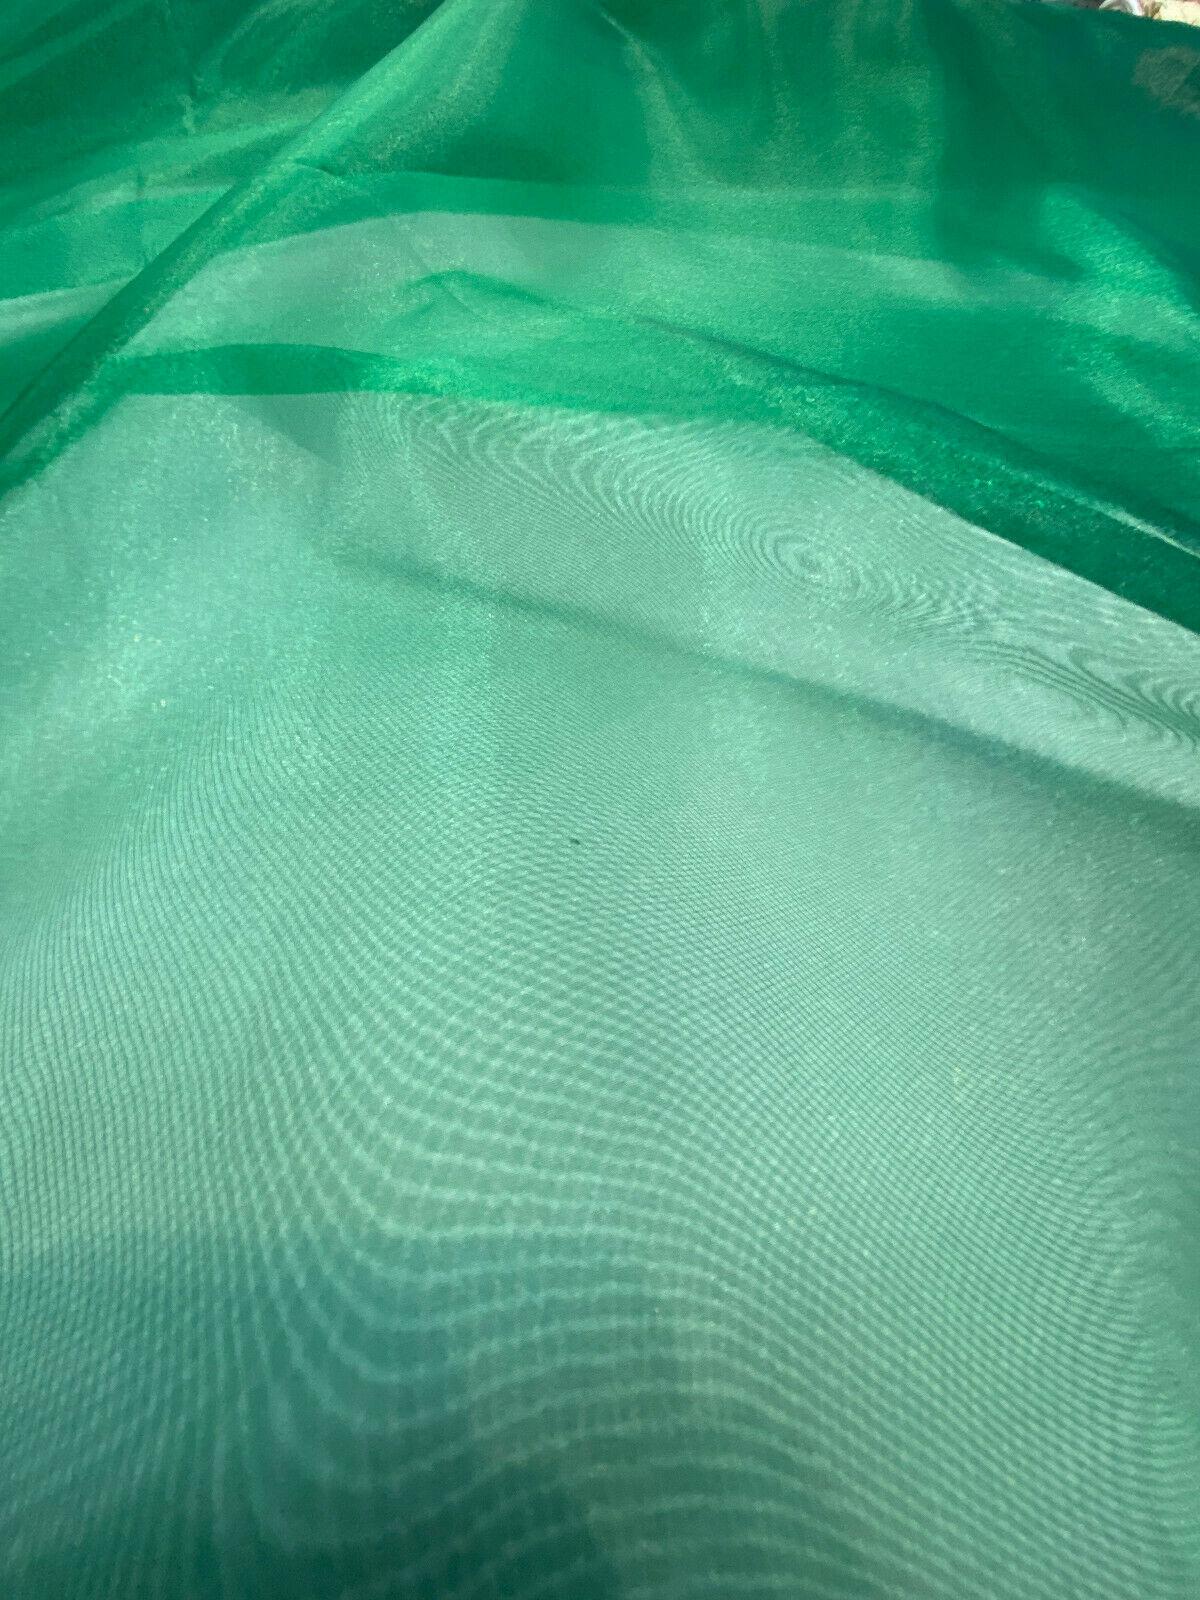 French Green 120 Inch Organza Double Width Fabric By The yard – Affordable  Home Fabrics